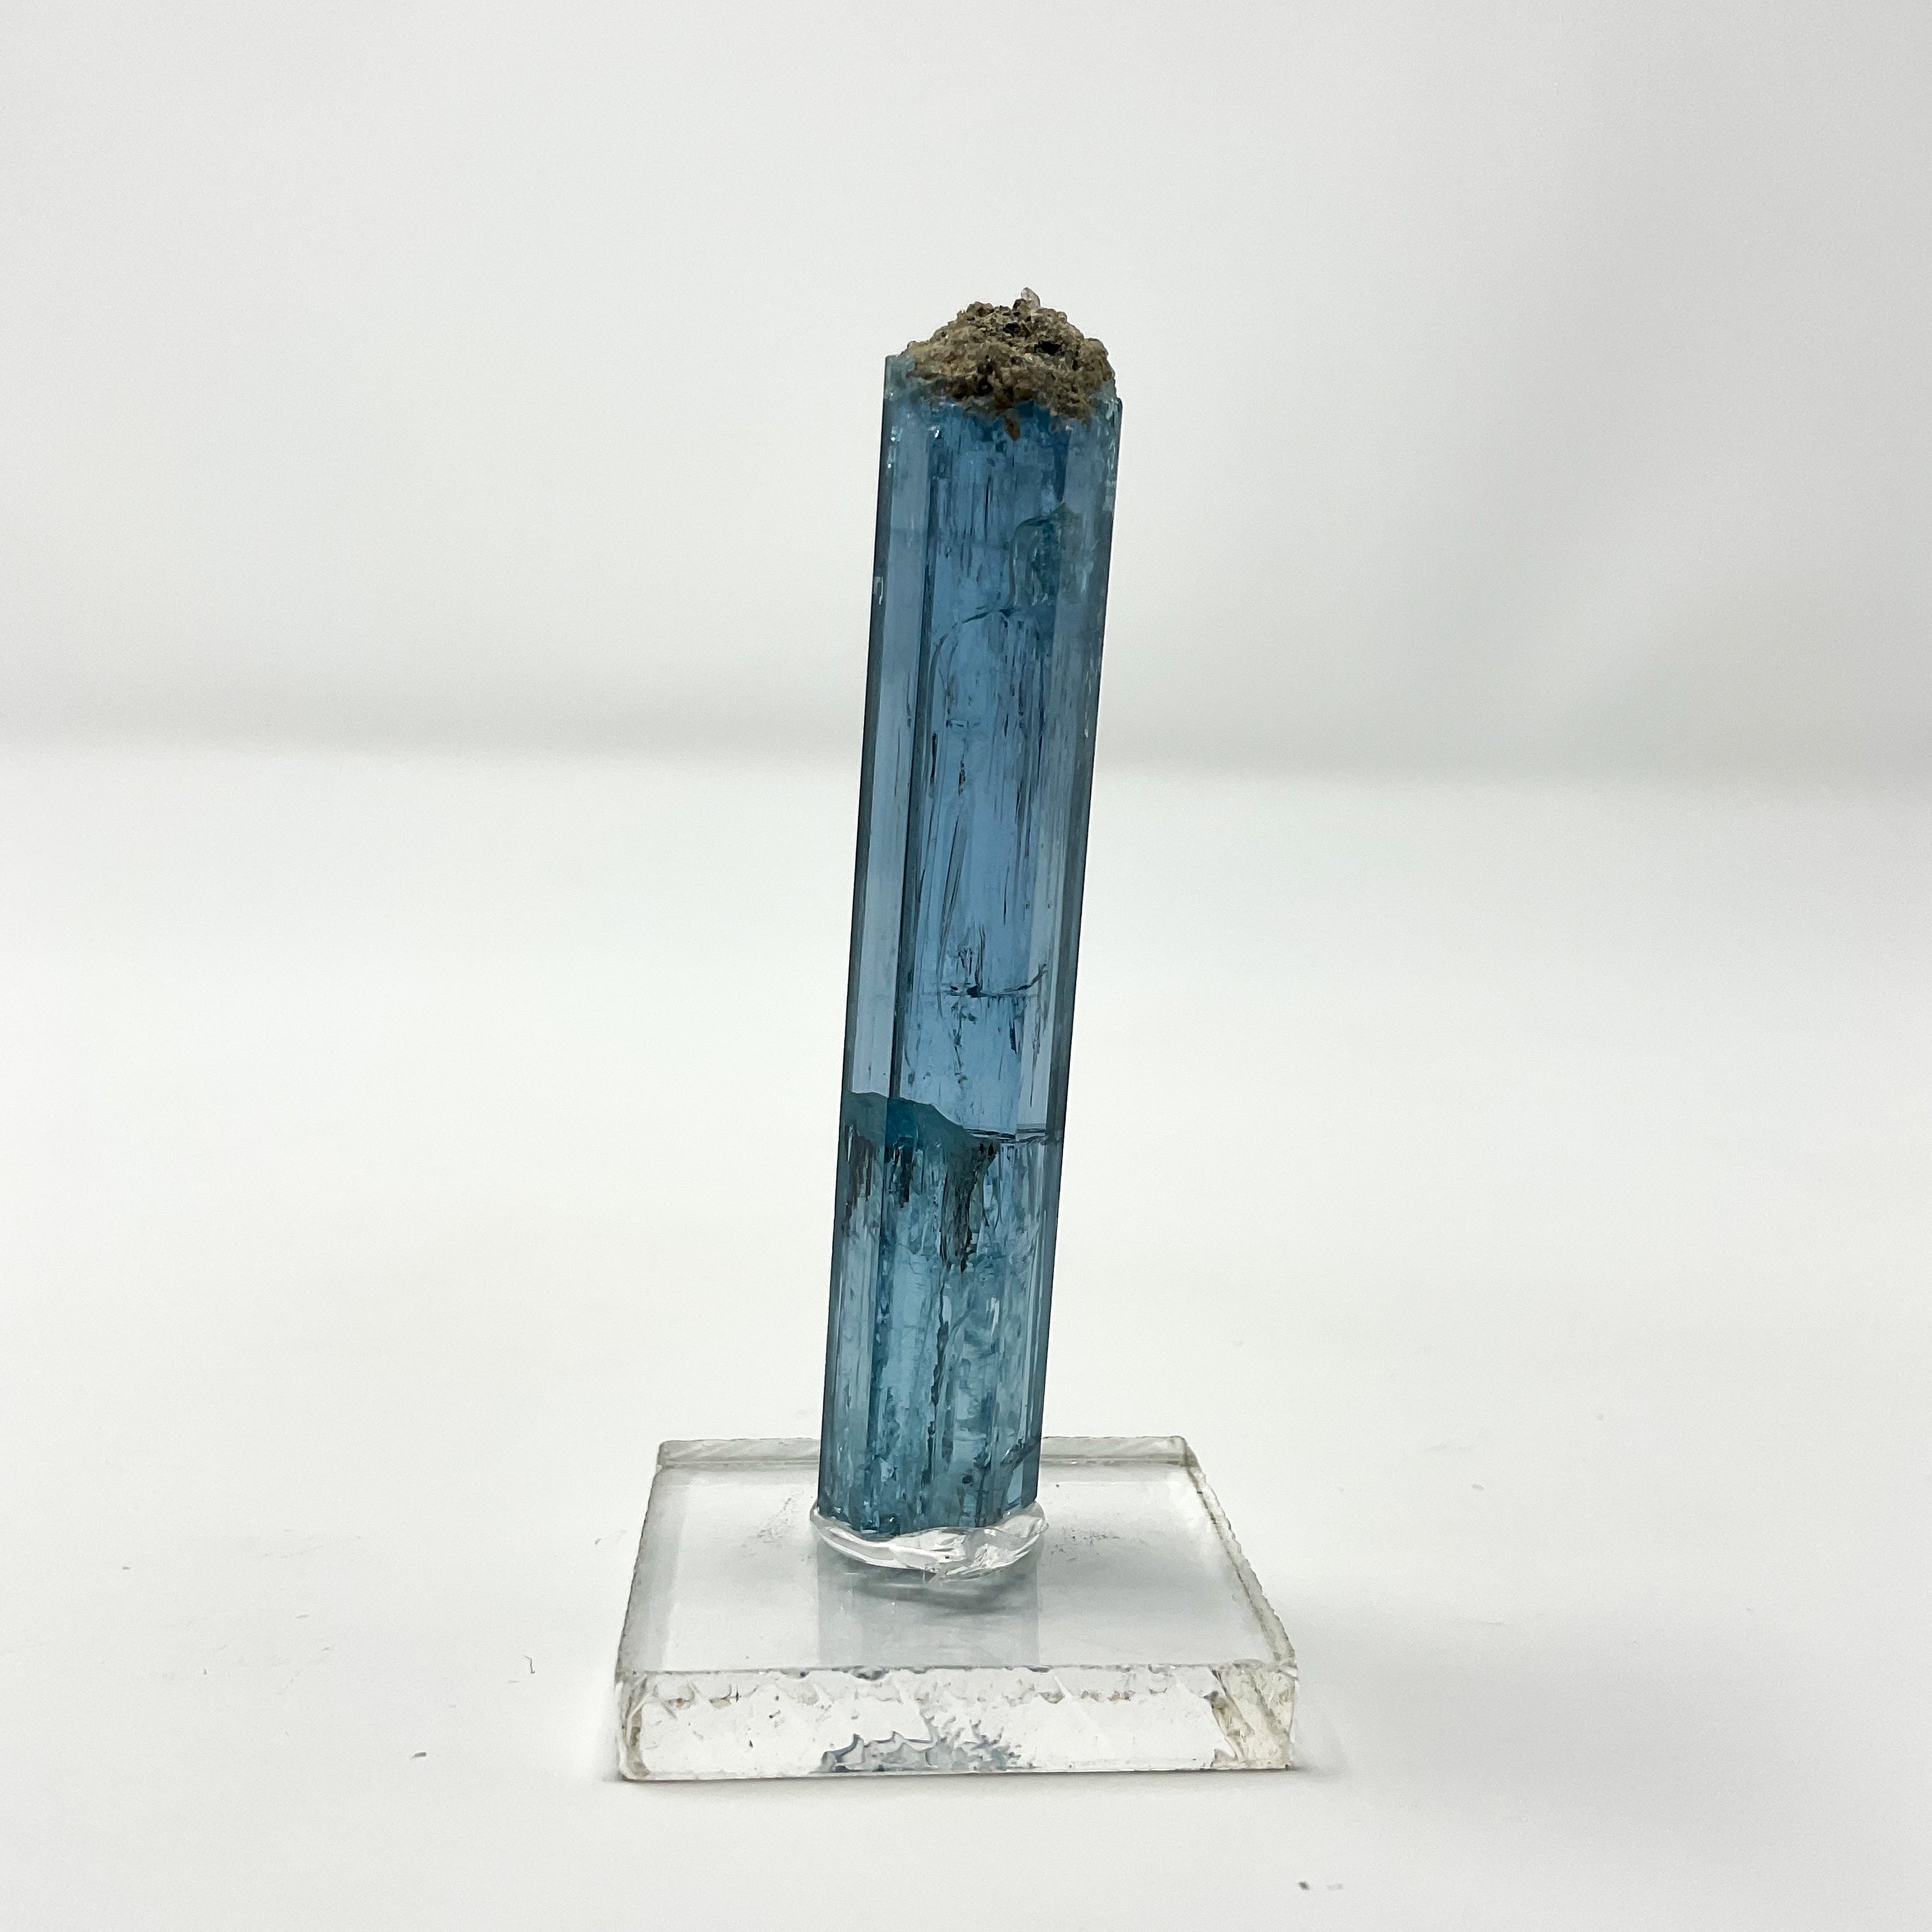 Aquamarine from the Nghe An Province in Vietnam